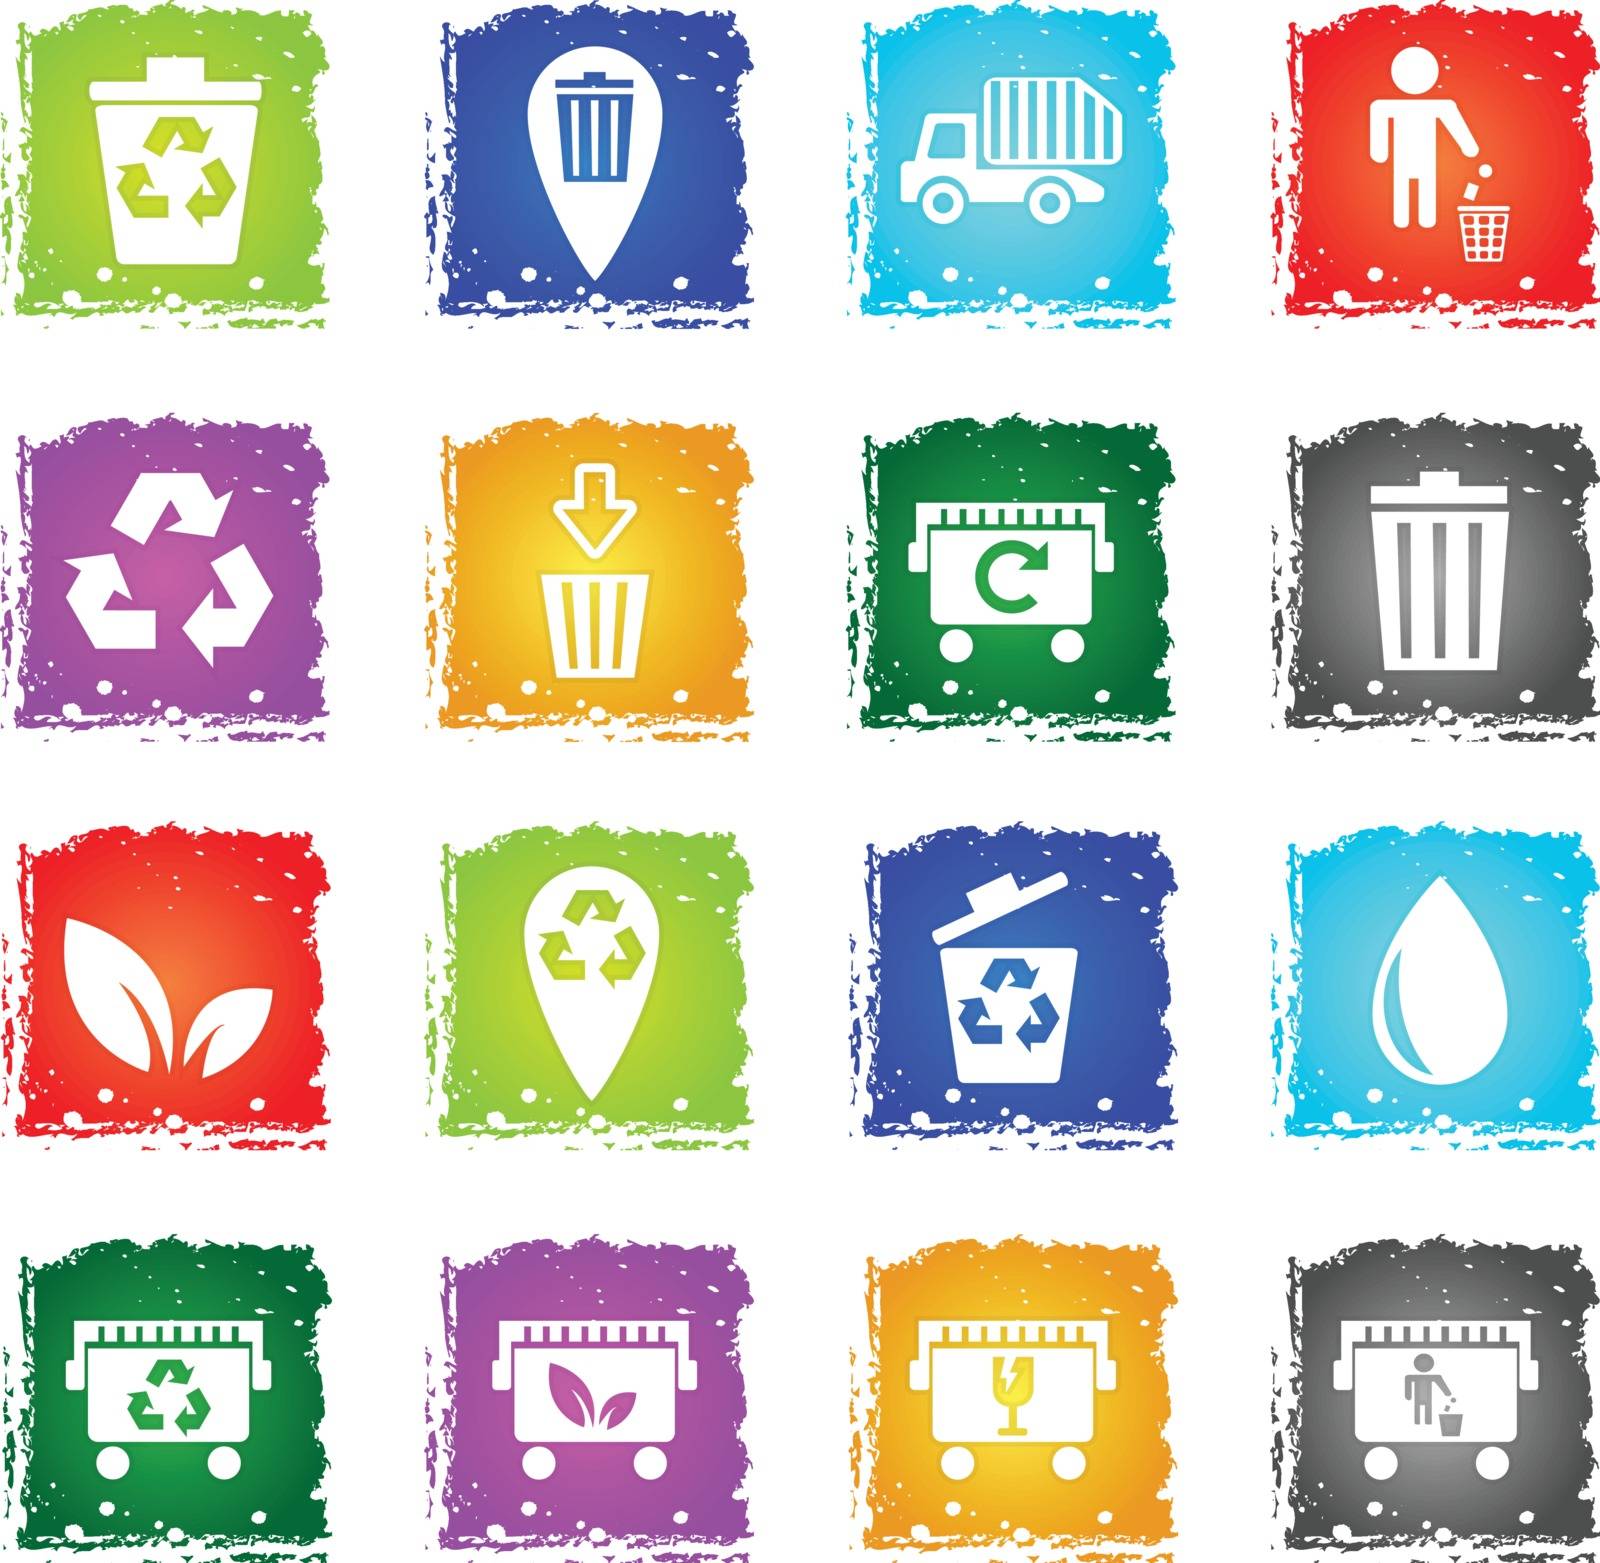 garbage web icons in grunge style for user interface design